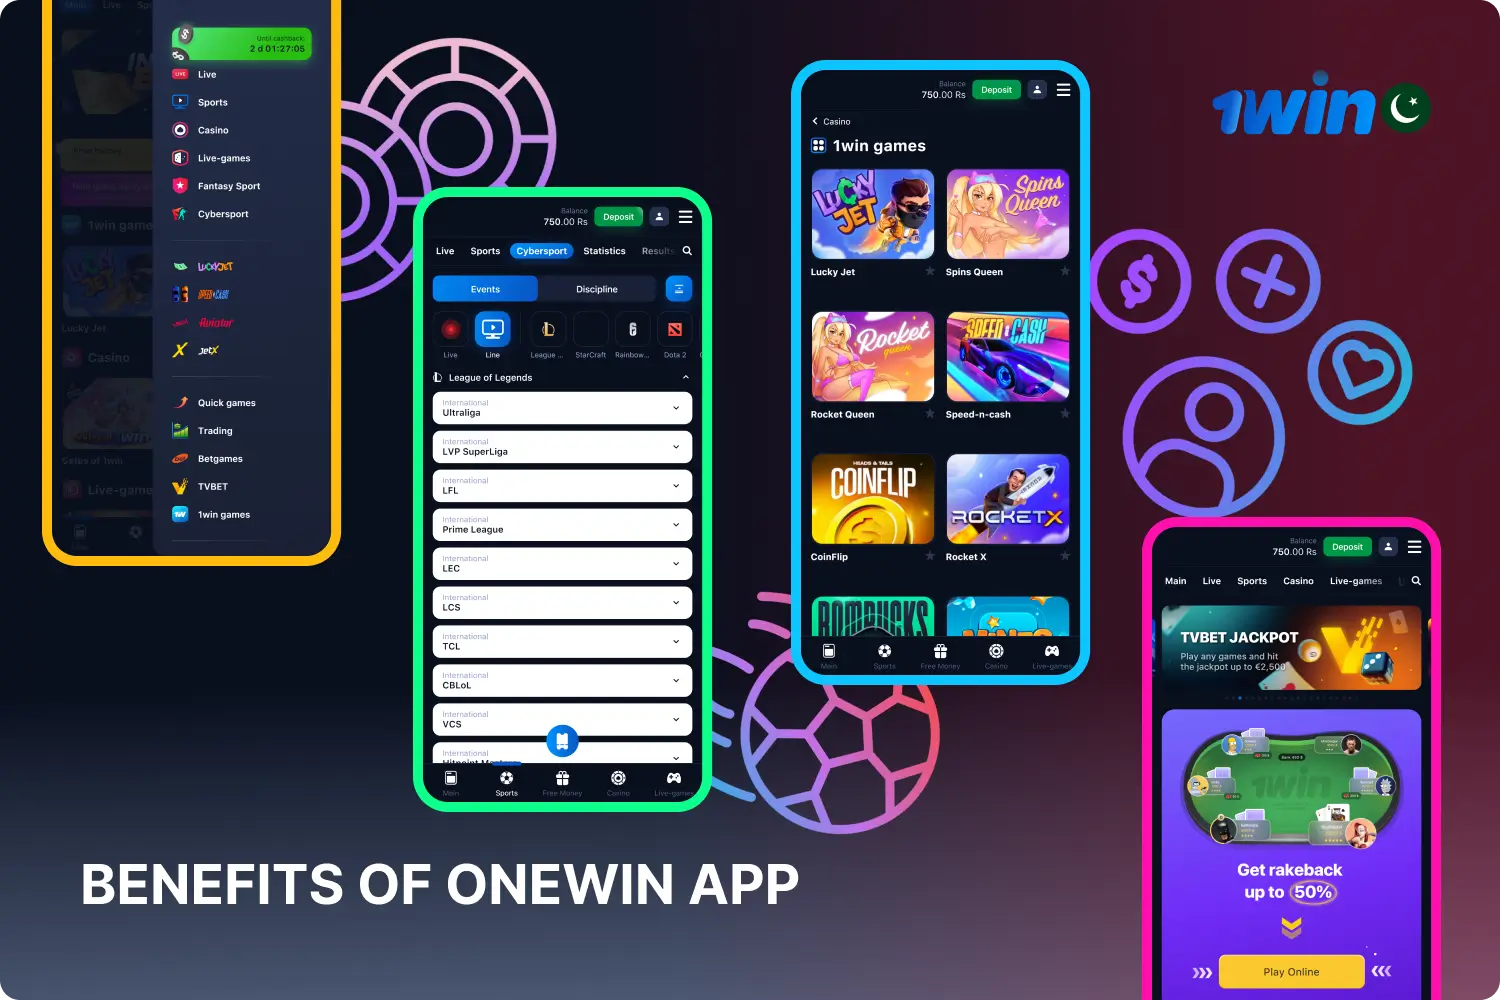 The 1win mobile app for Android and iOS is valued by players in Pakistan for its convenience, security, wide selection of sporting events and variety of casino games